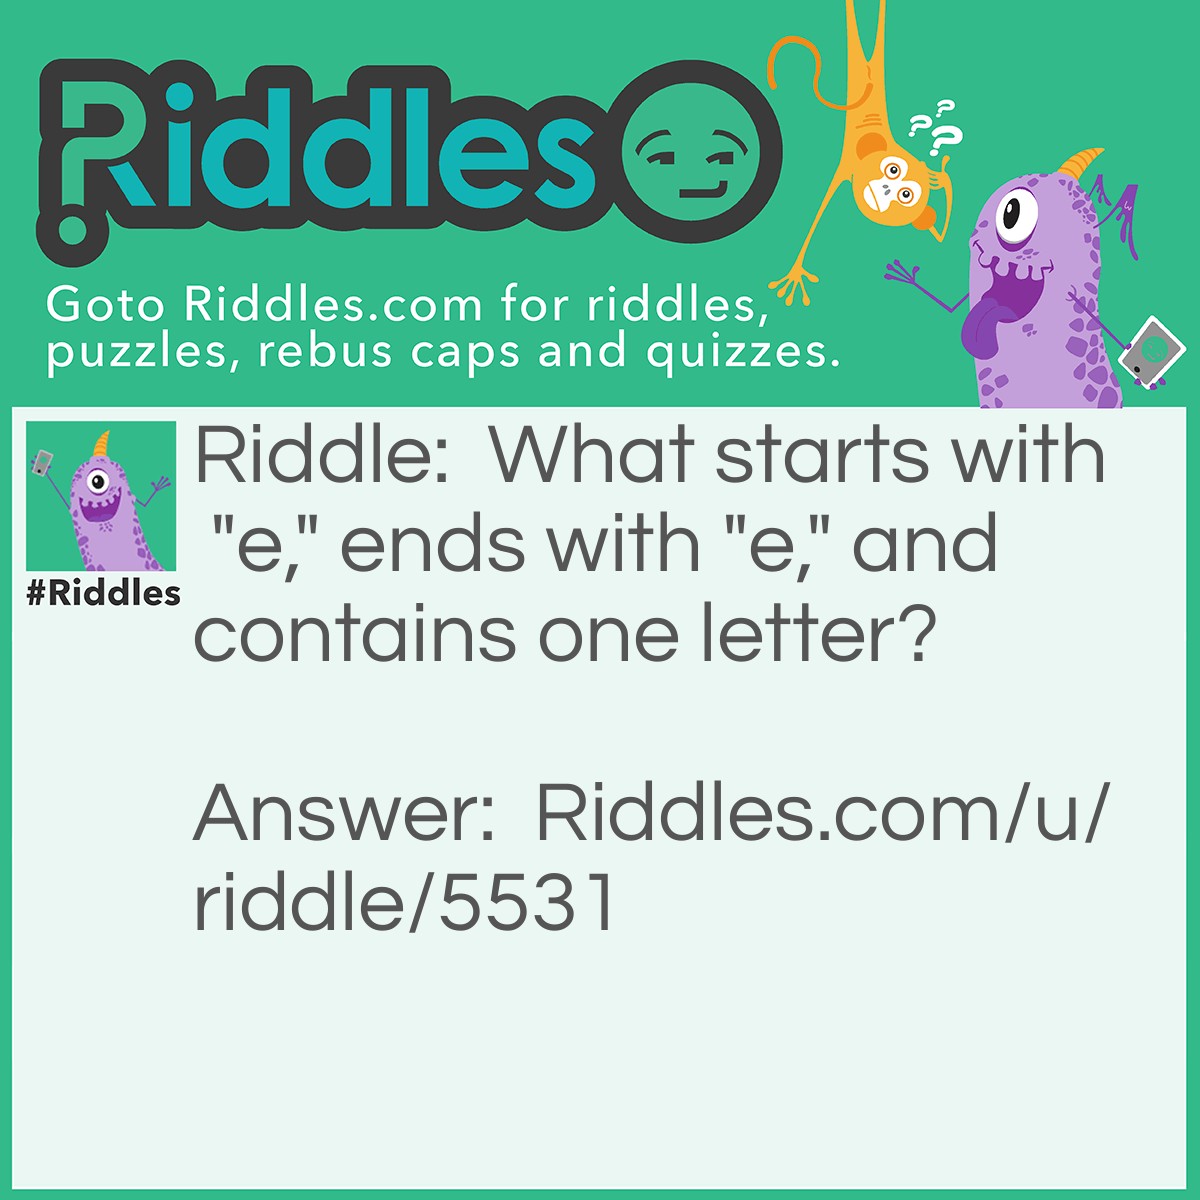 Riddle: What starts with "e," ends with "e," and contains one letter? Answer: Envelope.